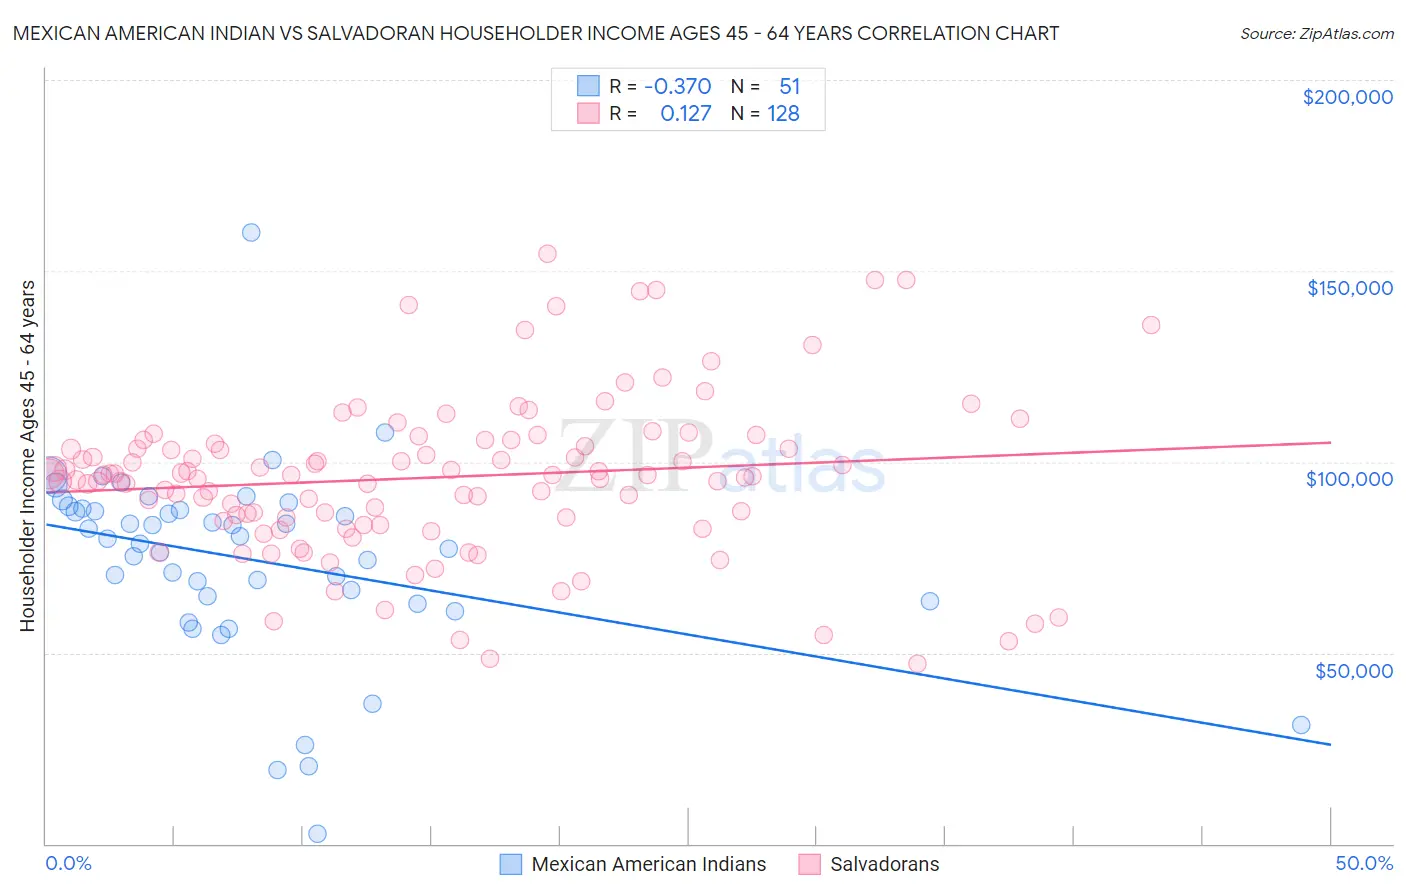 Mexican American Indian vs Salvadoran Householder Income Ages 45 - 64 years